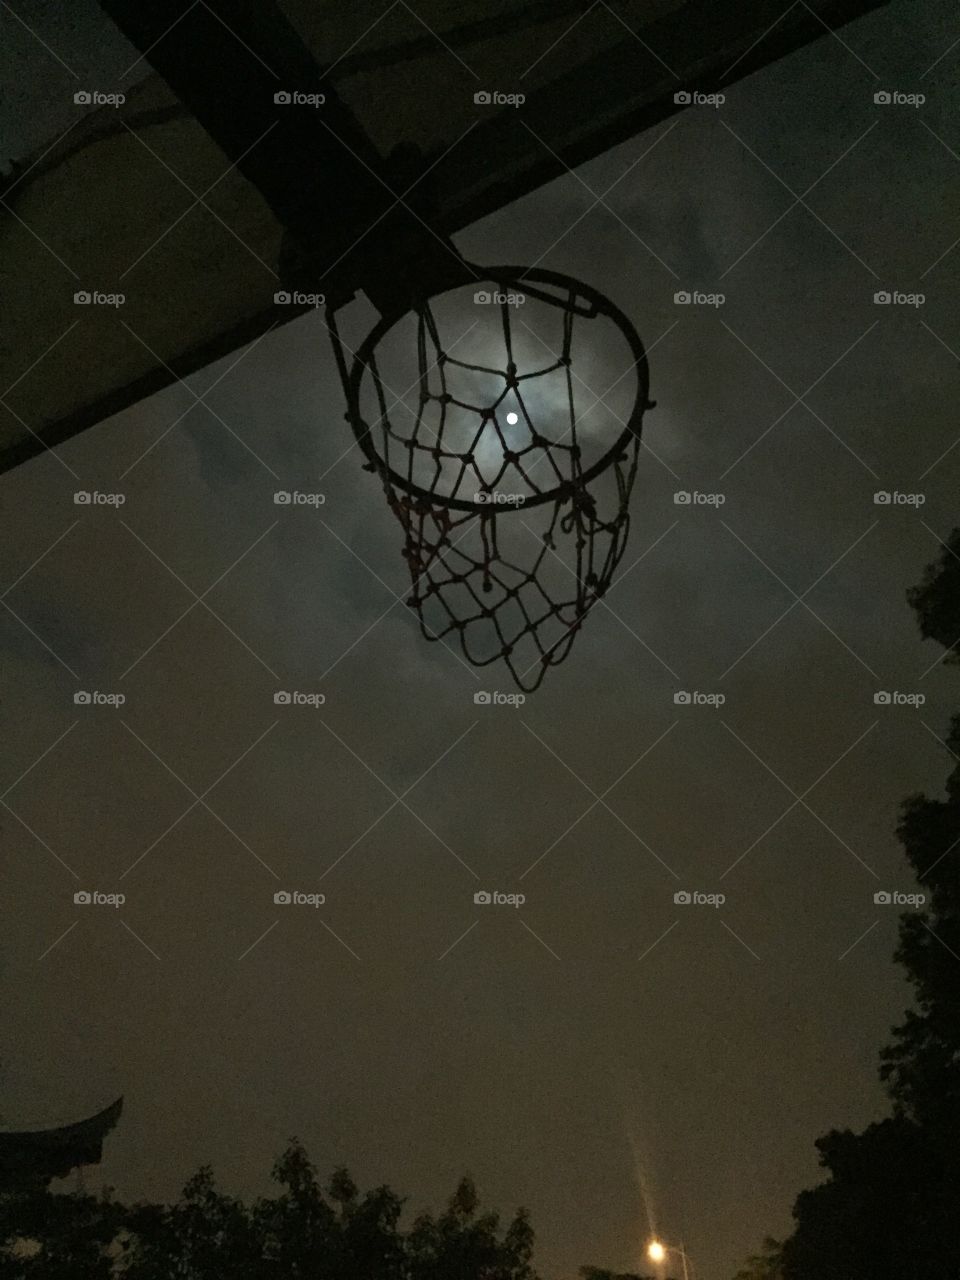 Moon in the basket